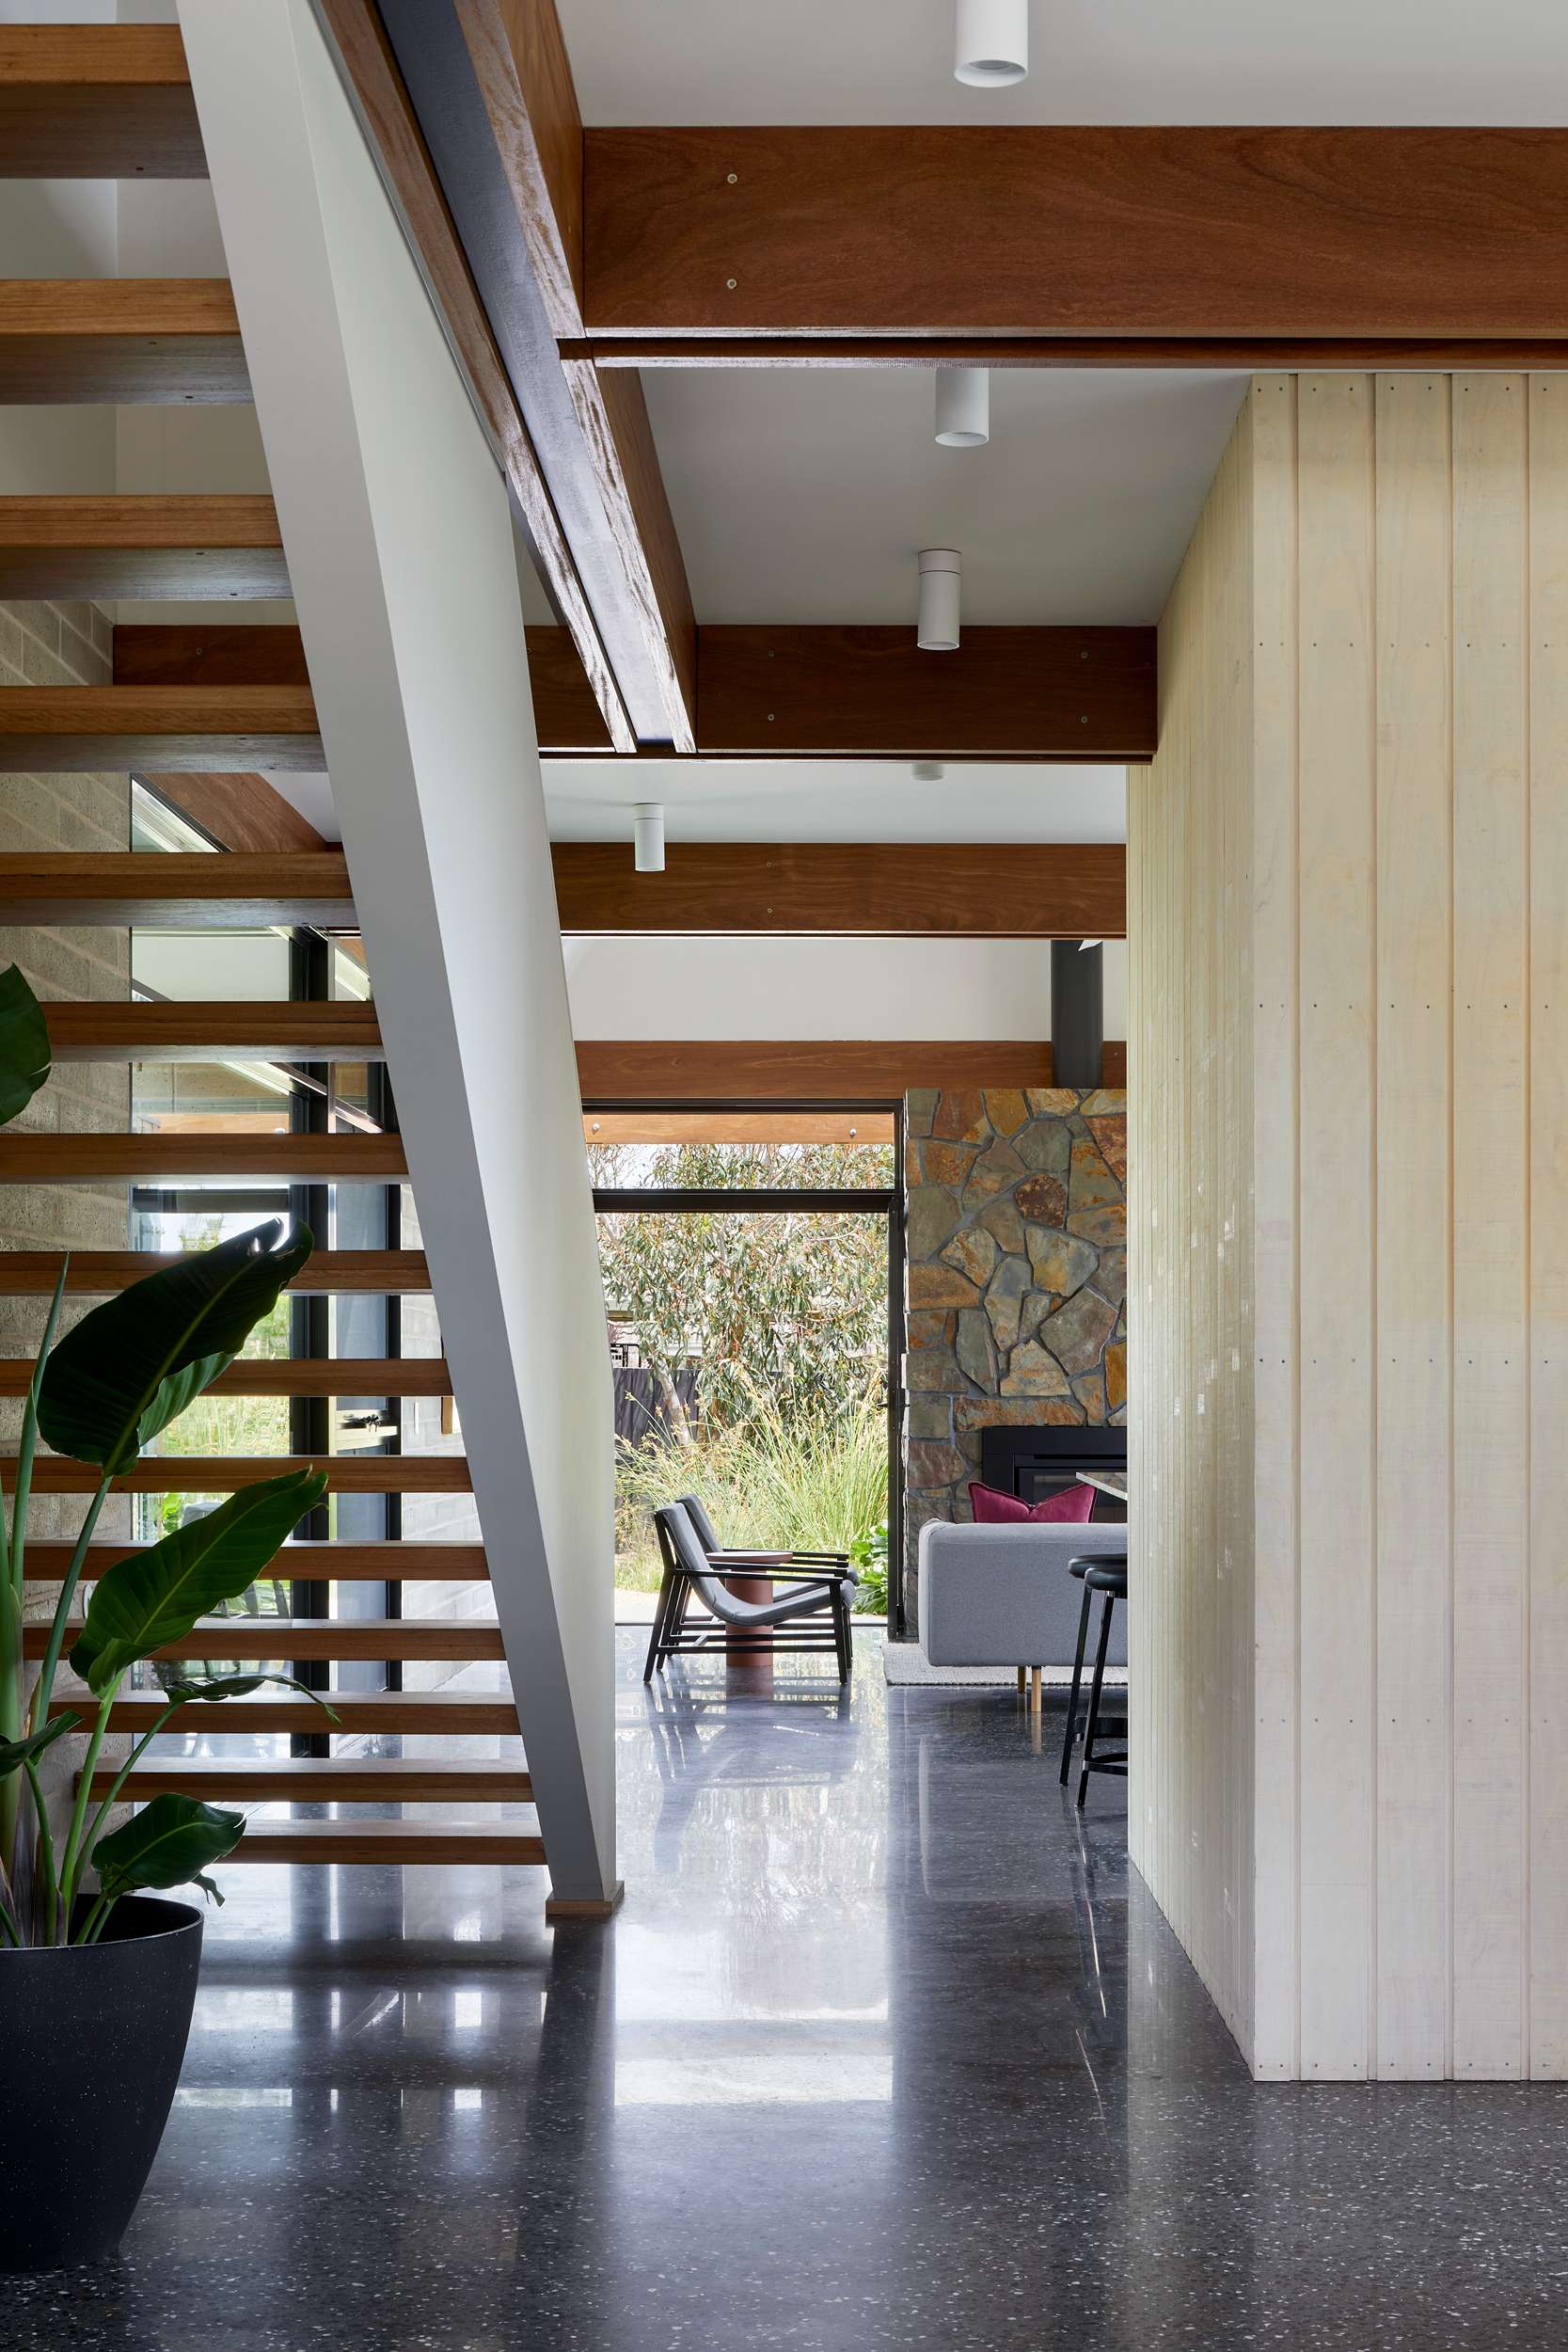 An interior shot of this house showing the open staircase and views out to the landscape in the background